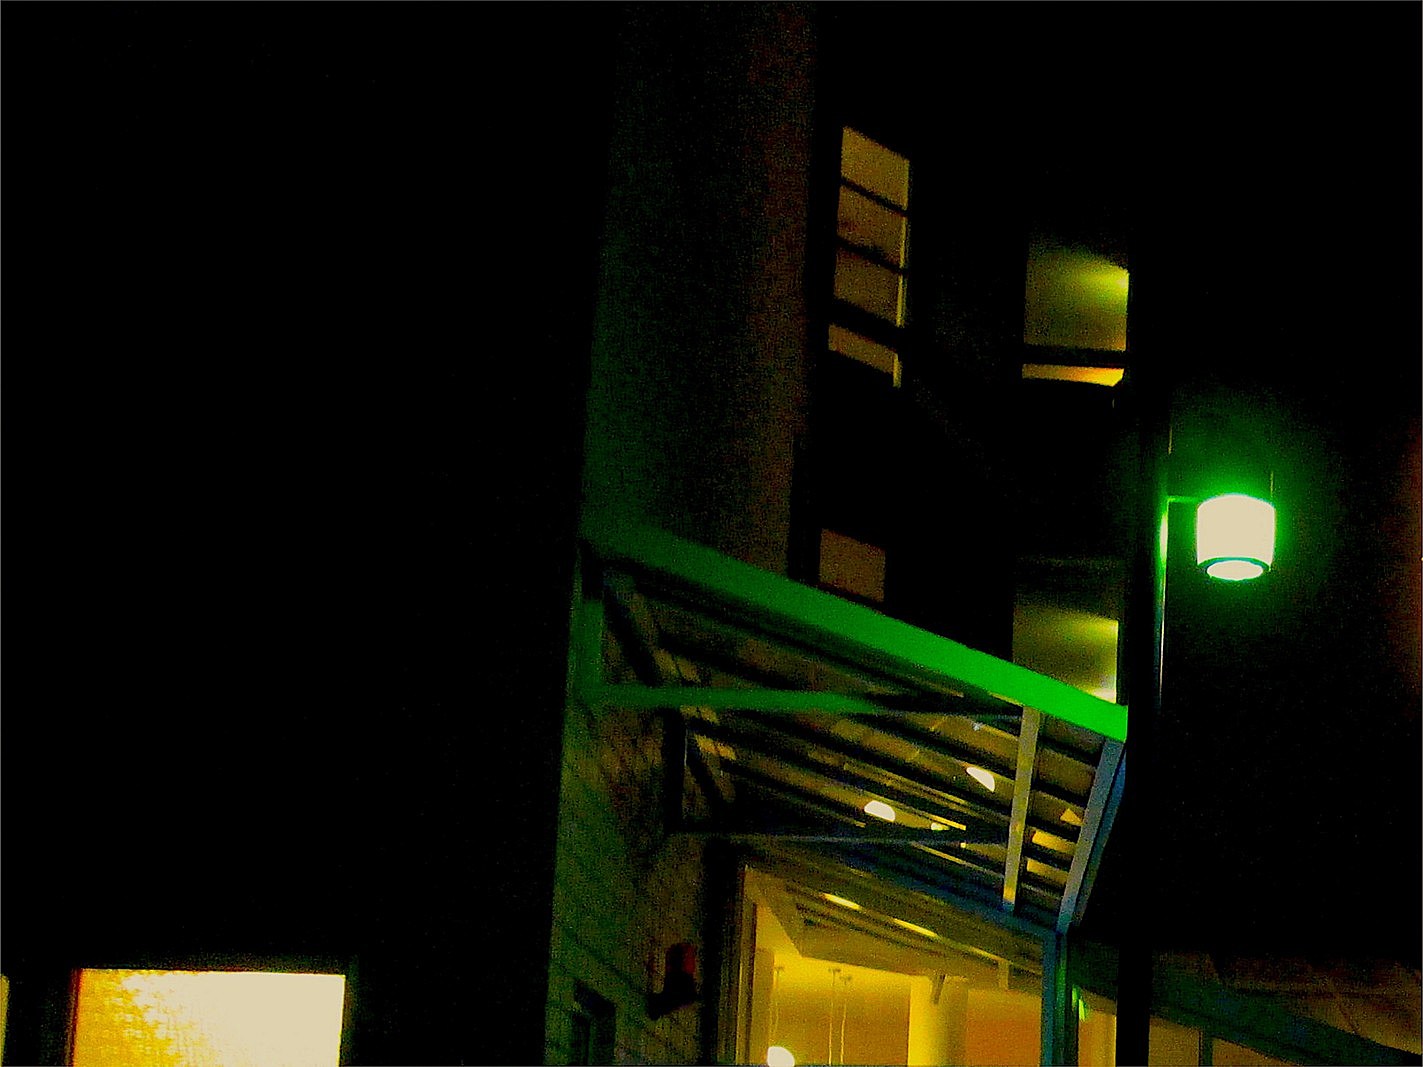 Night Modern House Building Warm Window Lightings with a Green Porch Light